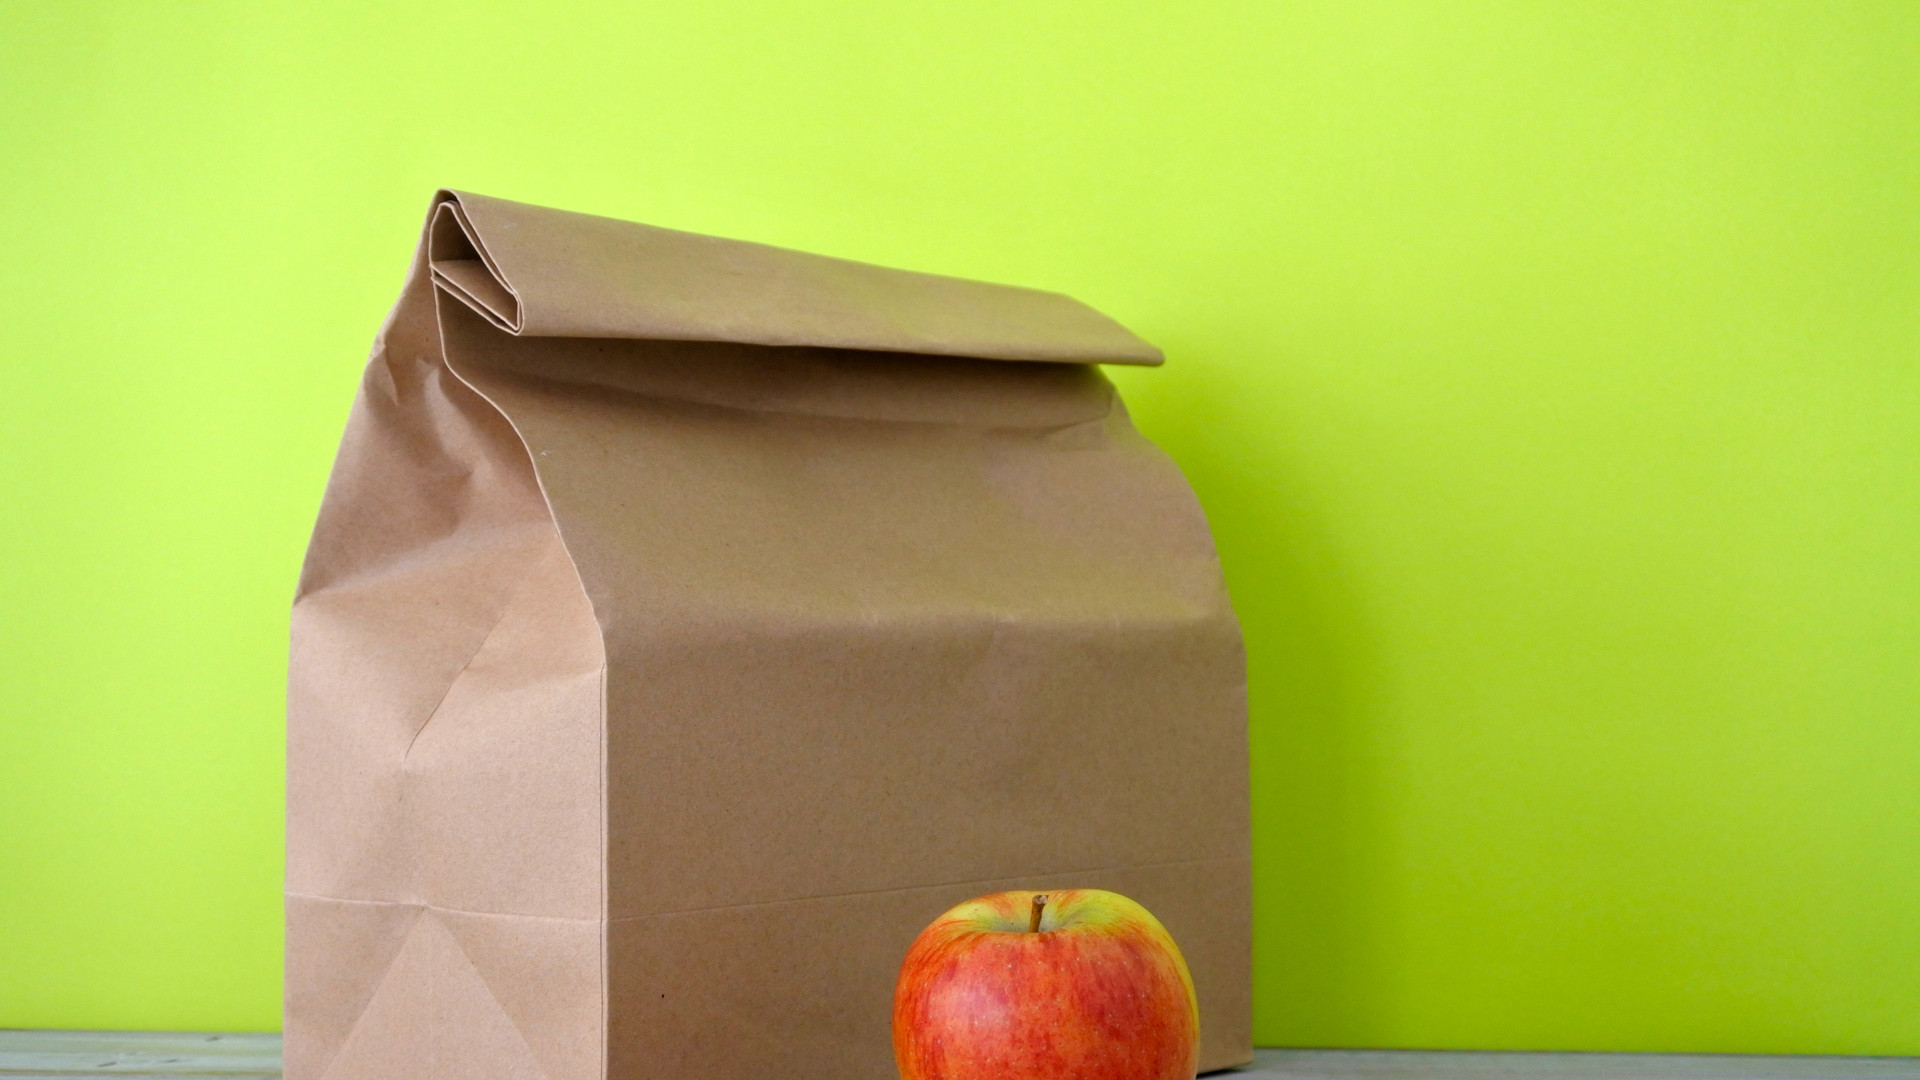 Lunch packed in a brown paper bag with red apple